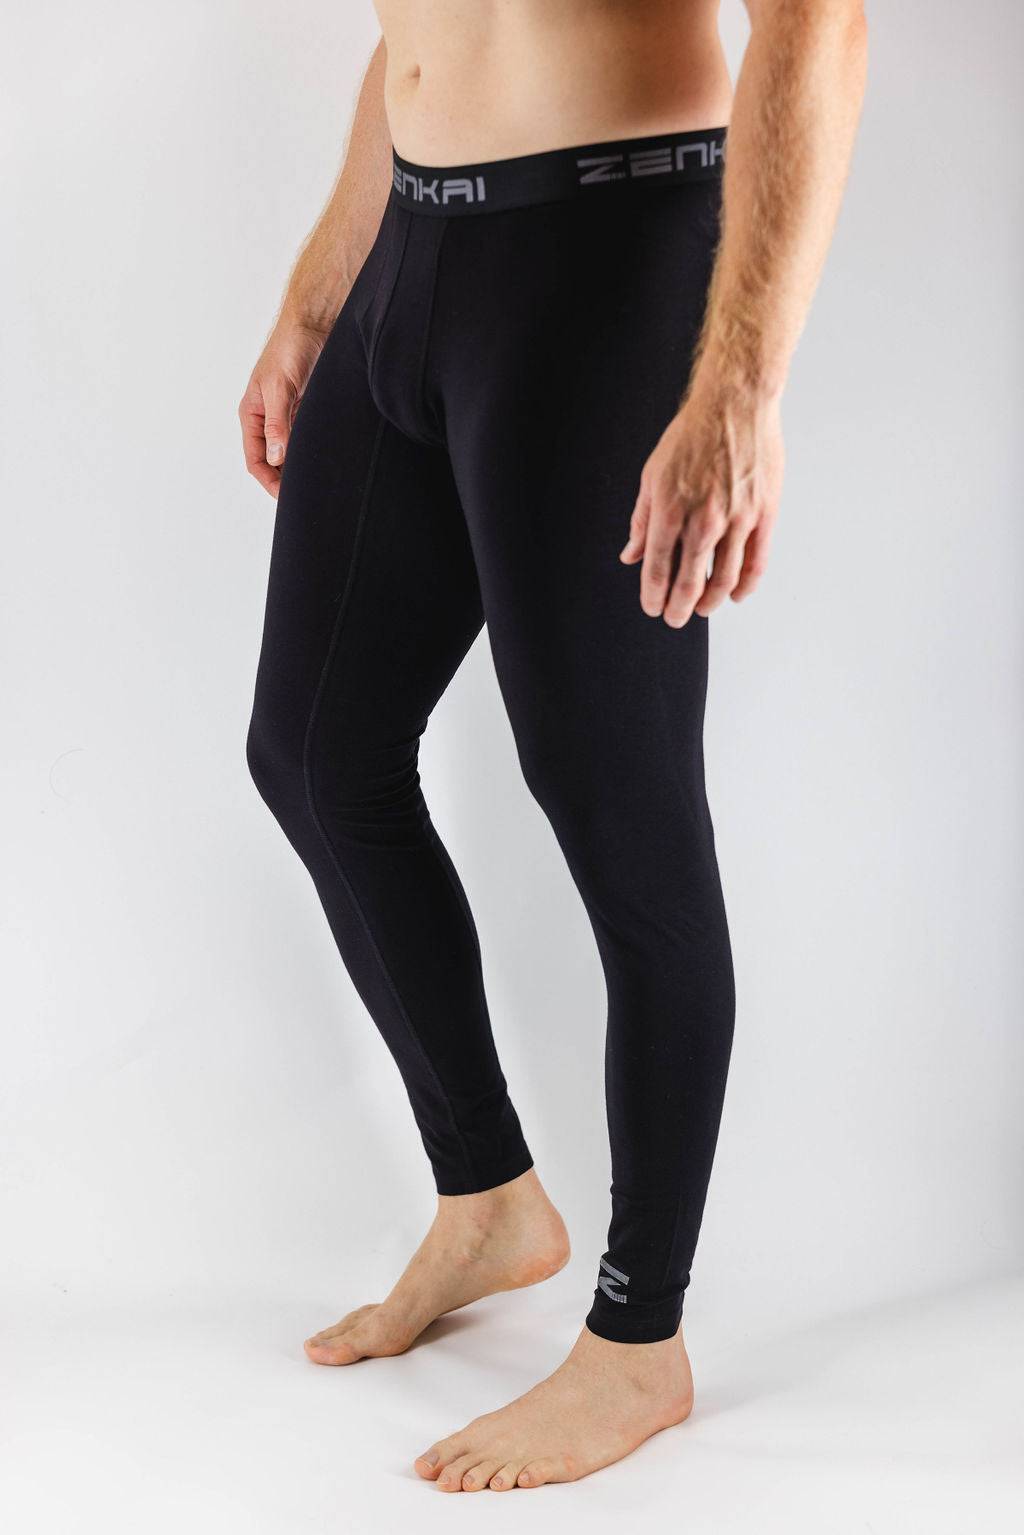 Running Tights for Men – To Cover or Not to Cover